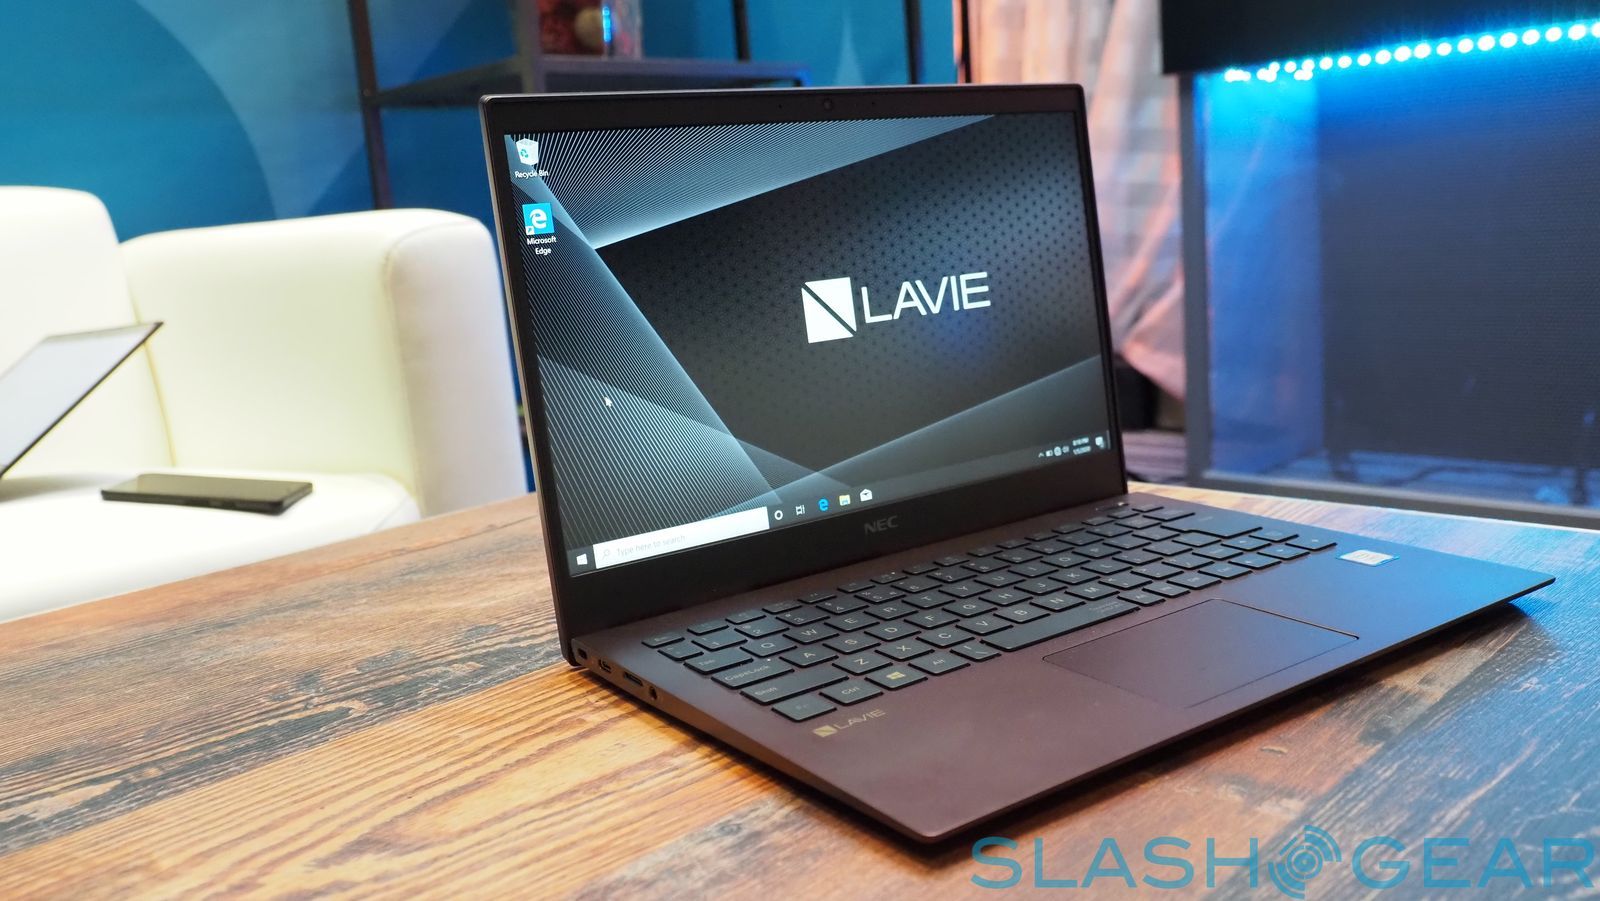 NEC Launches Two Lavie Ultrabooks And An All-In-One PC In The US